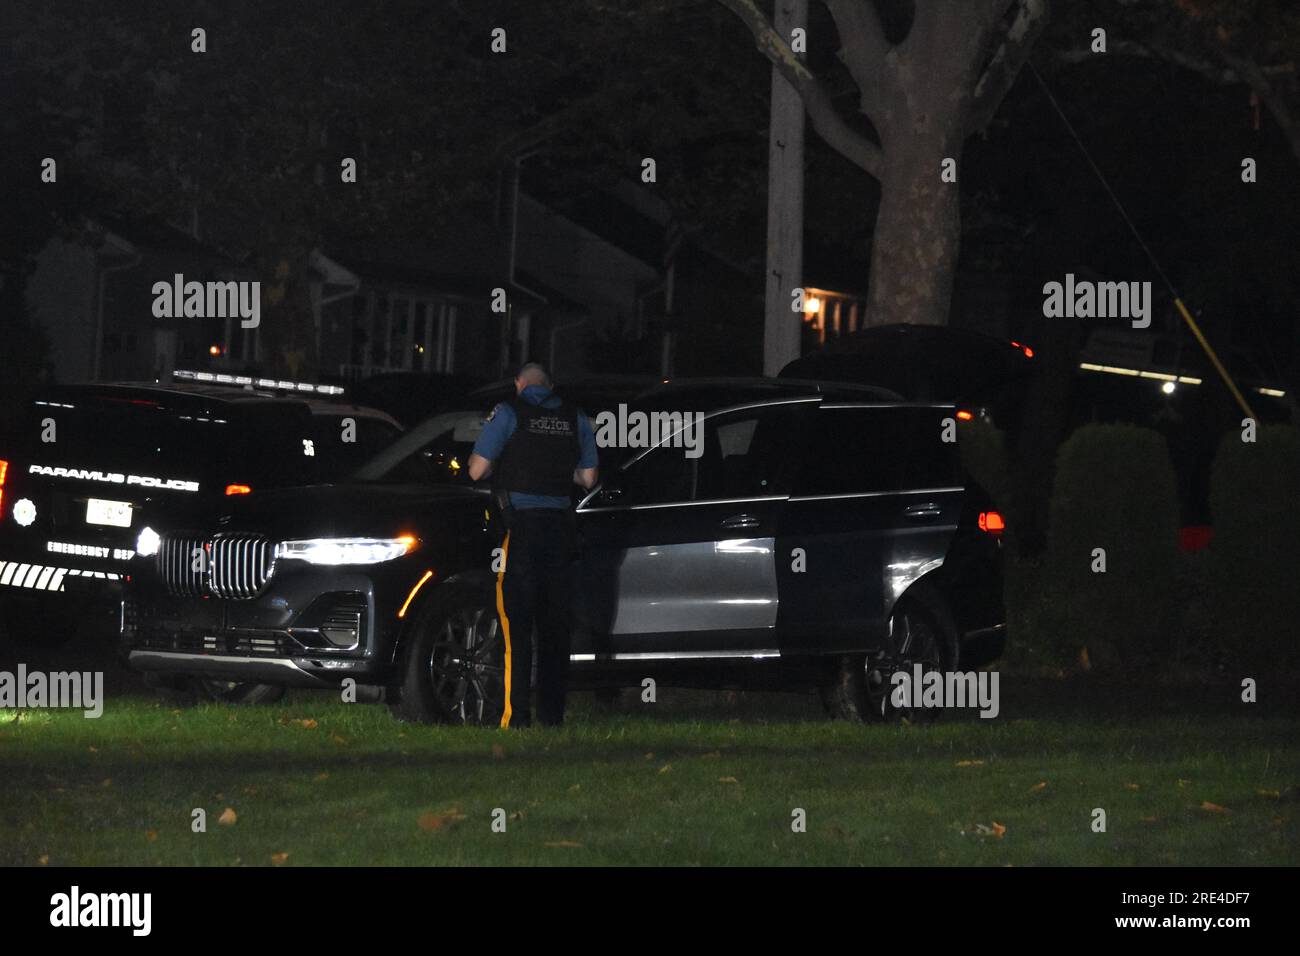 Paramus, United States. 25th July, 2023. Police investigate the crime scene and prepare to tow the stolen vehicle. Car burglars were in the area of Ehret Street and Lawrence Drive in Paramus, New Jersey. Around 11:45 PM, Monday evening Paramus police were scouring the area for two males approximately 5'8, 140 lbs, dressed in all black. The car thieves crashed a stolen vehicle in the area of Ehret Street. Authorities had assistance from the K9 Unit of the Bergen County Sheriff's Office. The search continued into the morning hours on Tuesday. Credit: SOPA Images Limited/Alamy Live News Stock Photo